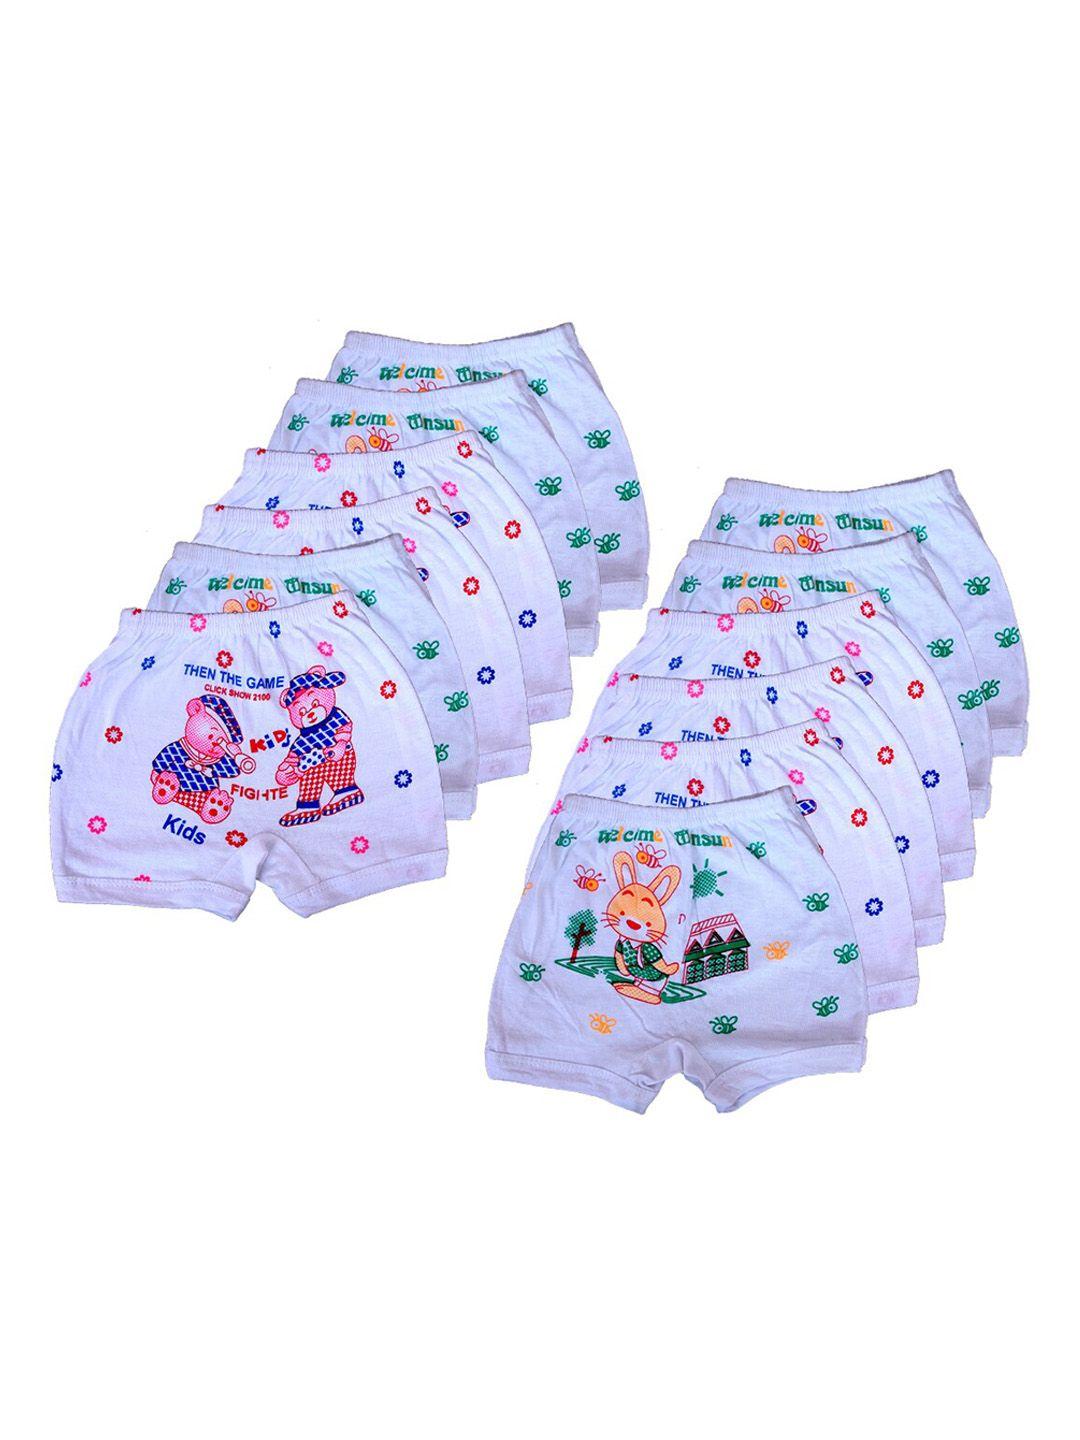 baesd infants pack of 12 printed cotton basic briefs 55_w.s.p_po-12